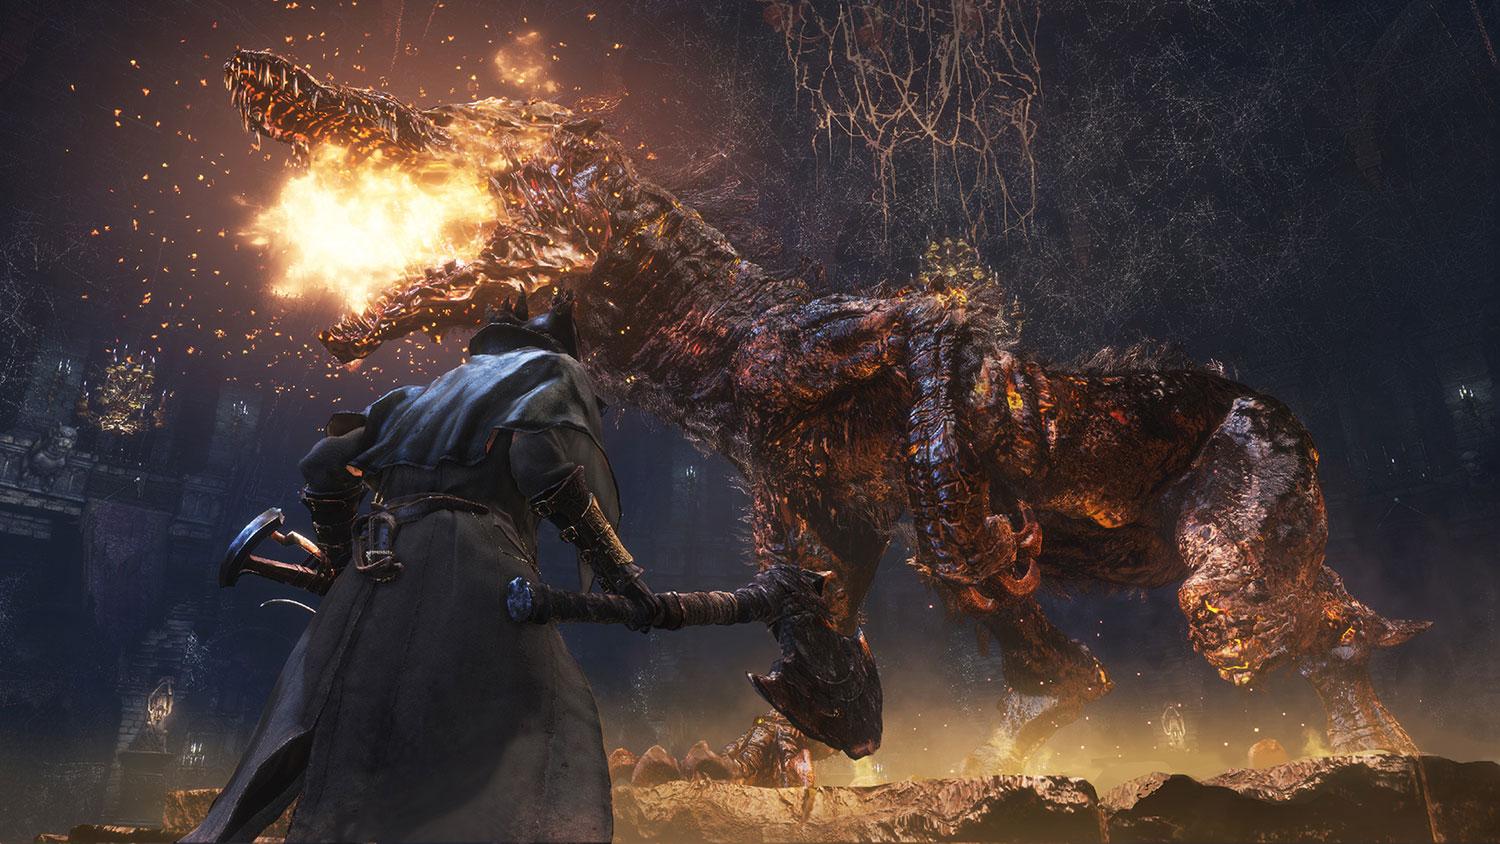 Dark Souls contains greatness but isn't great, by Brian Will